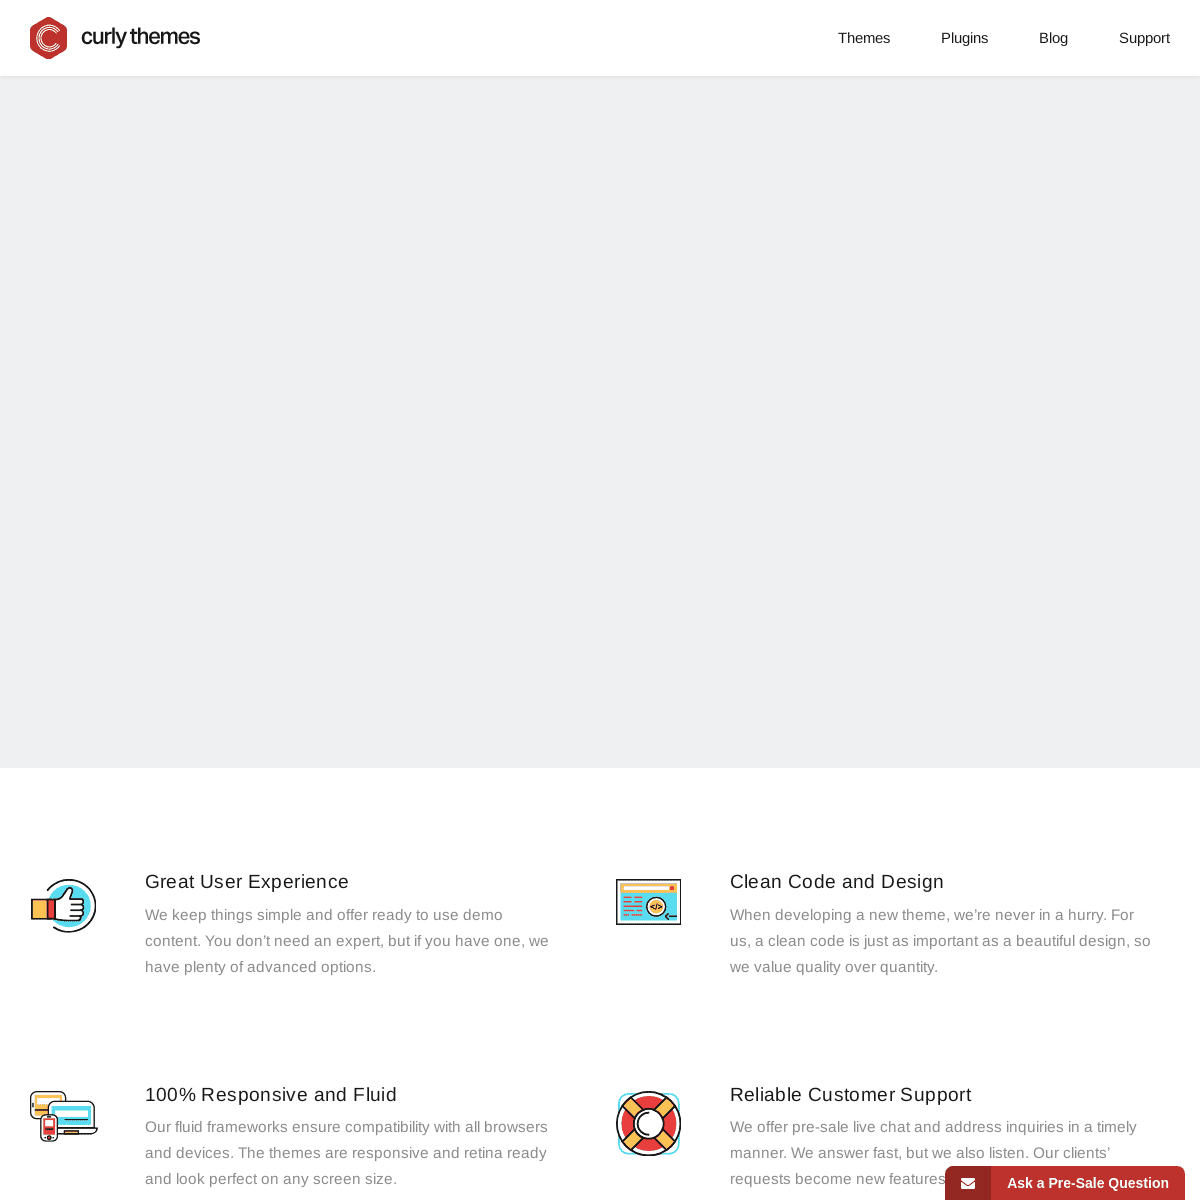 A complete backup of https://curlythemes.com